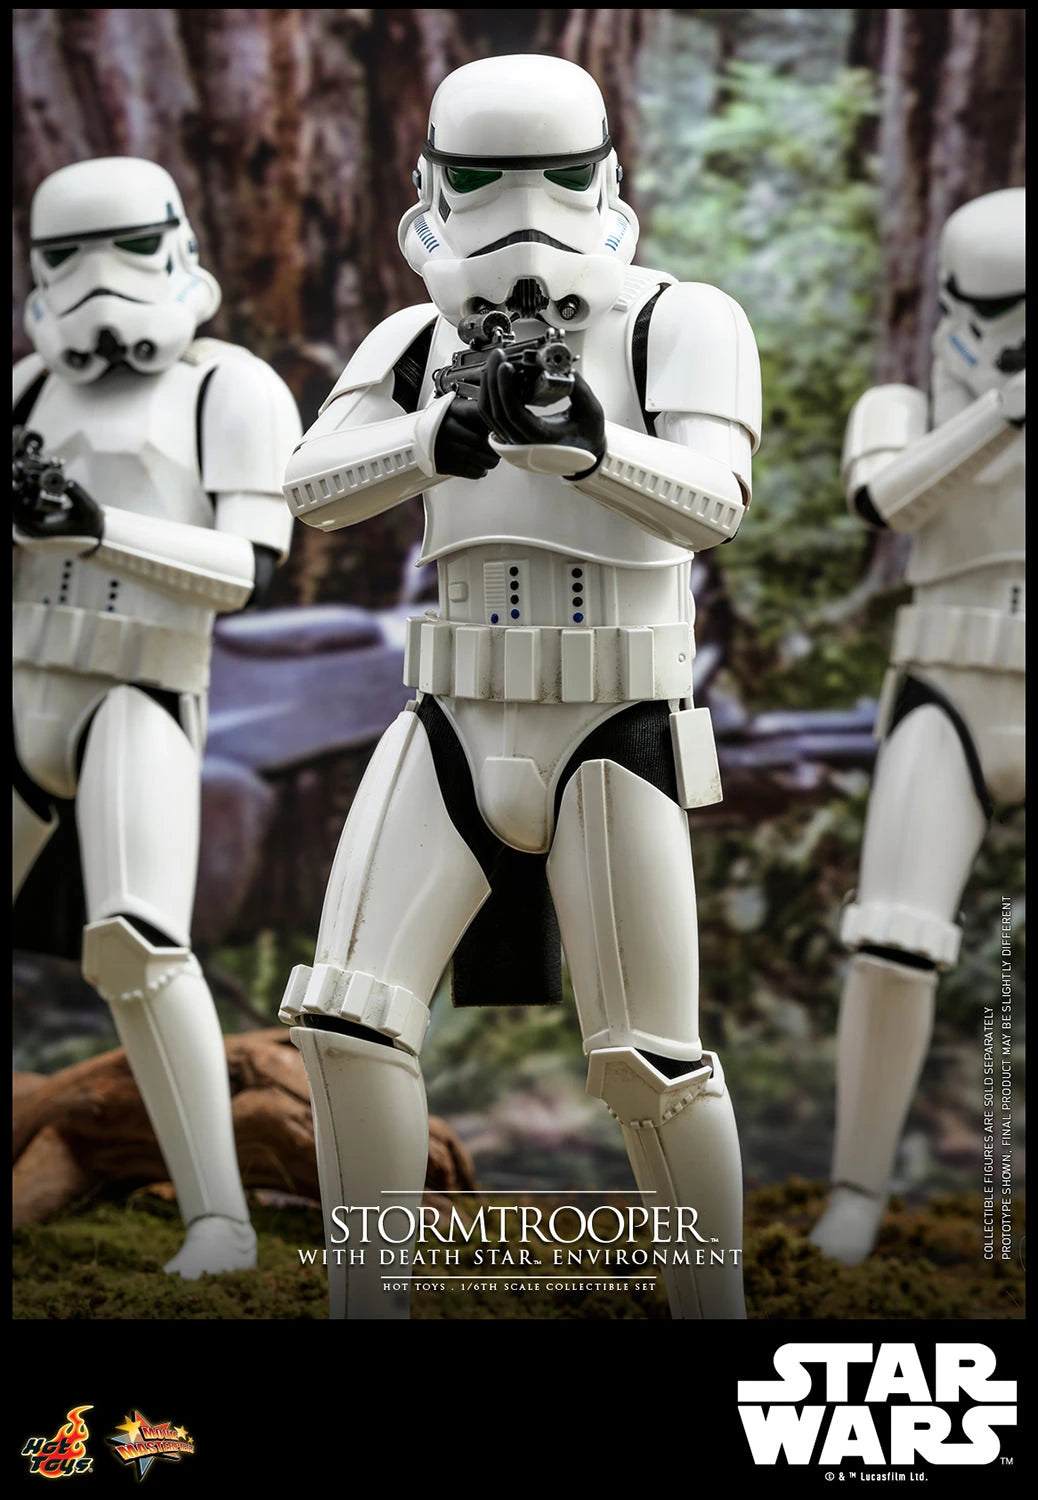 Hot Toys Star Wars Stormtrooper with Death Star Environment 1/6th Scale Figure